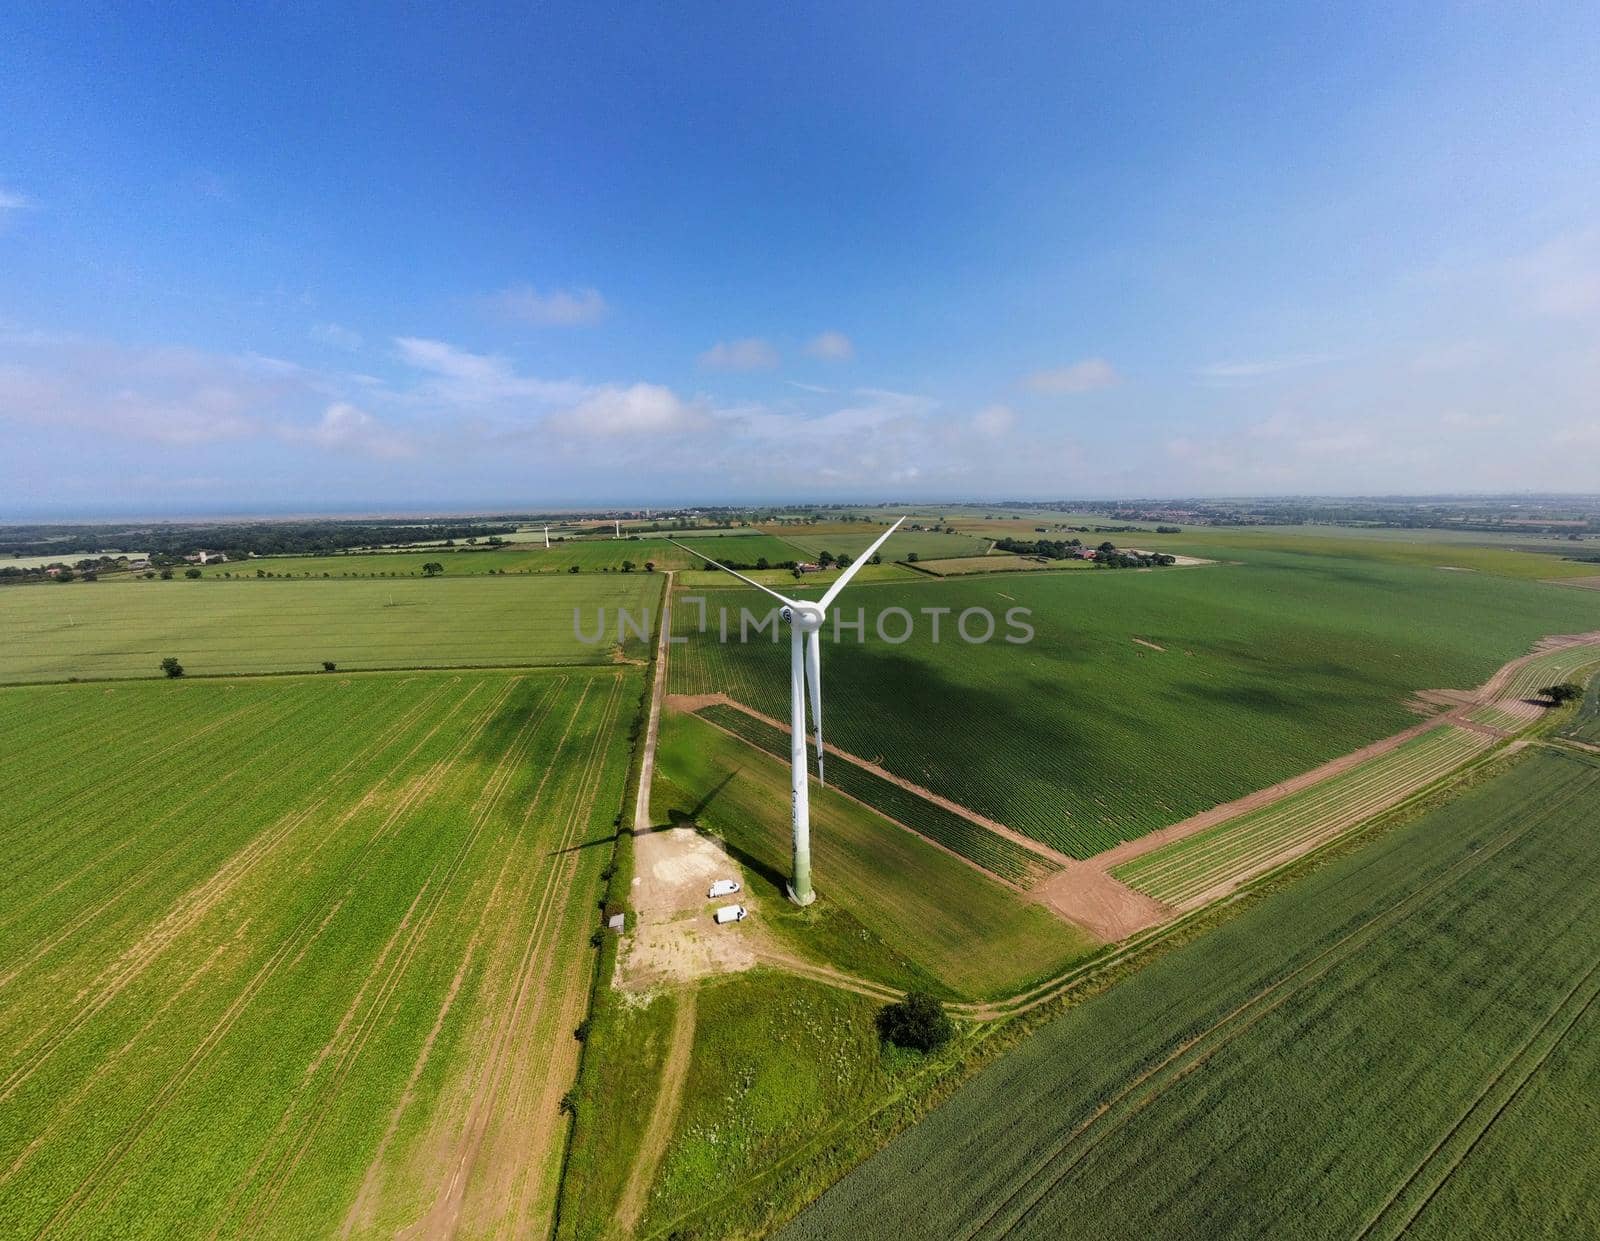 Drone shot of a single wind turbine up close, standing tall amongst a patchwork of green fields with prominent shadows from clouds overhead. Taken on a summer day in England, UK.